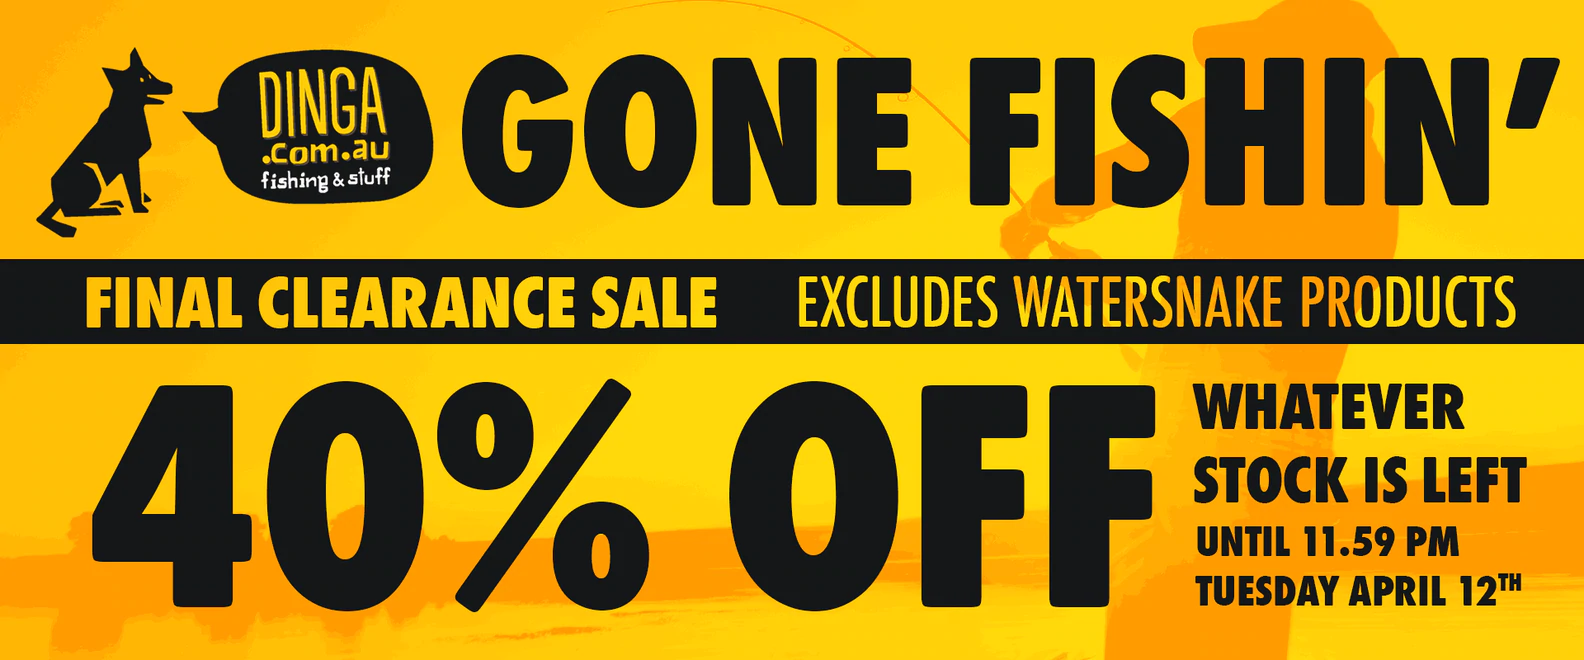 DINGA 40% OFF on Final clearance sale on fishing tackle, clothing, accessories & more